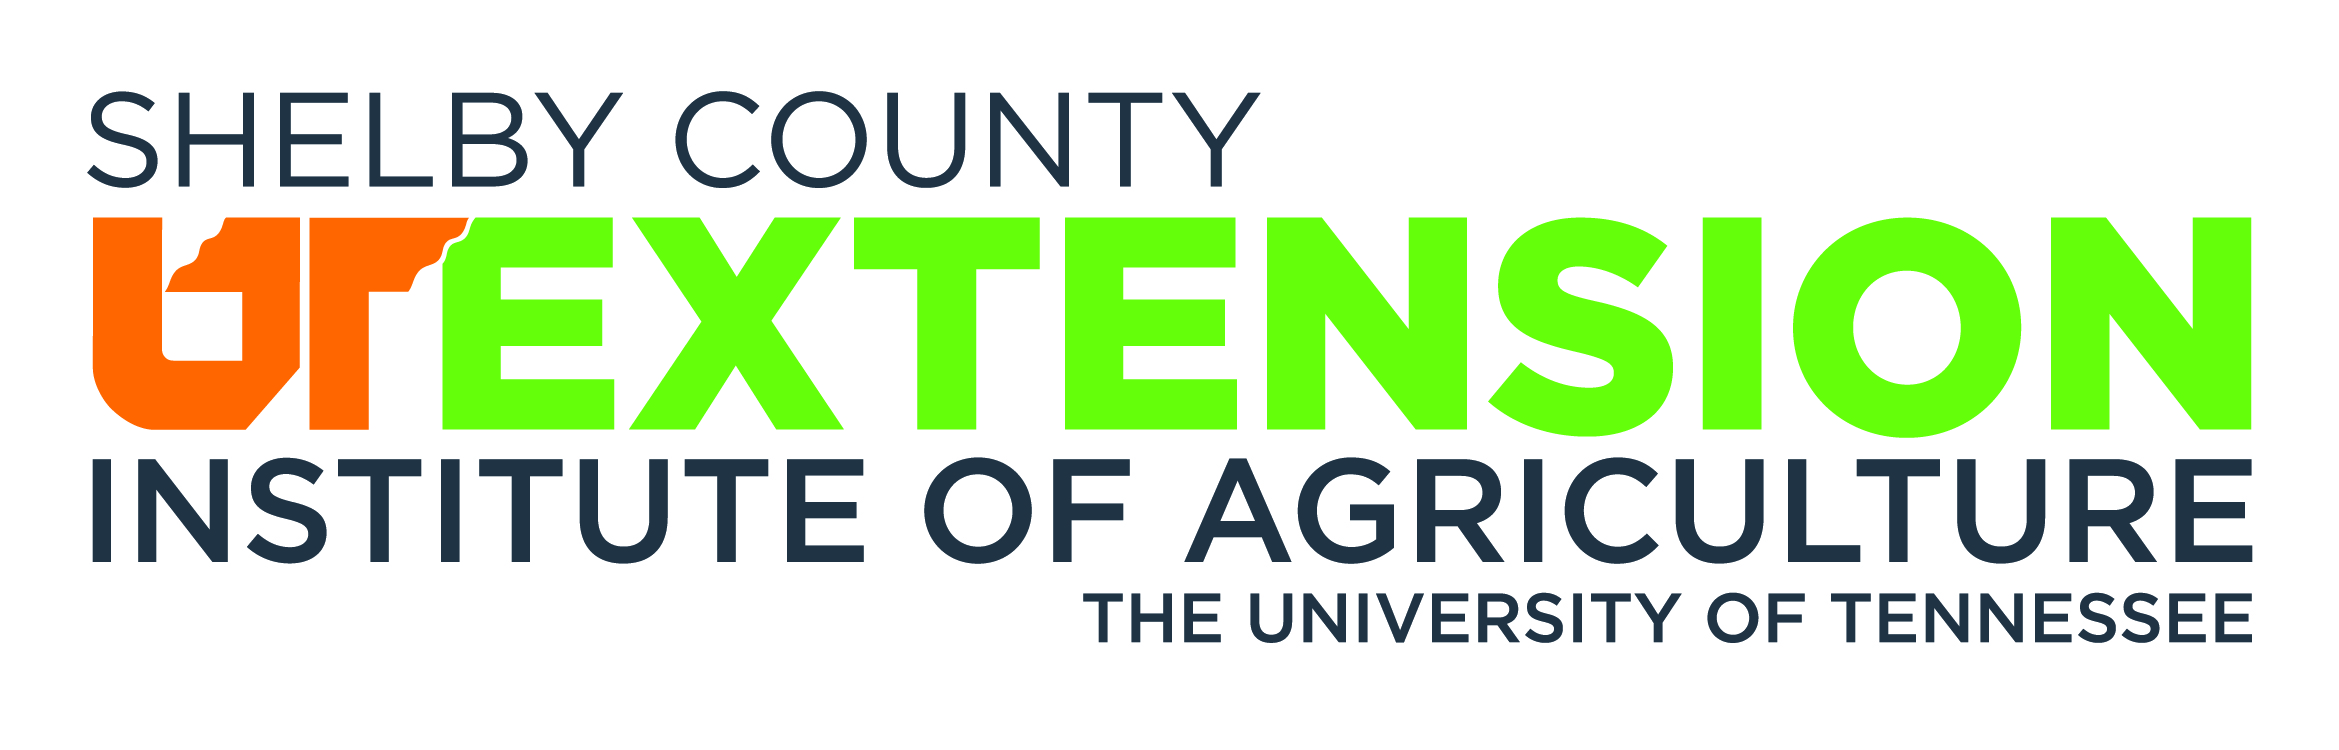 UT+Extension+Logo Shelby county